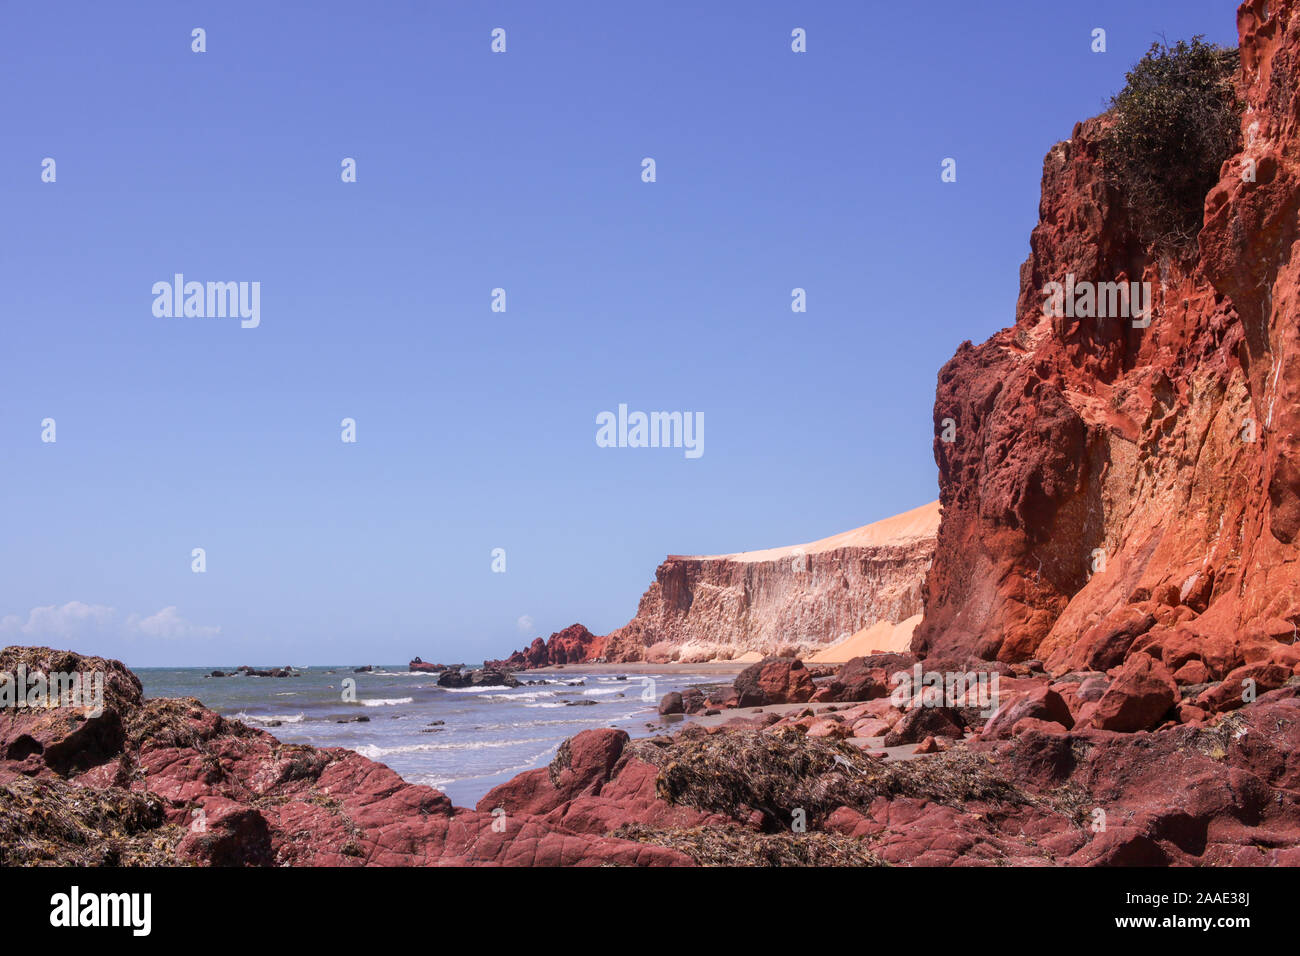 sunset at the cliffs of icapui in northern brazil Stock Photo